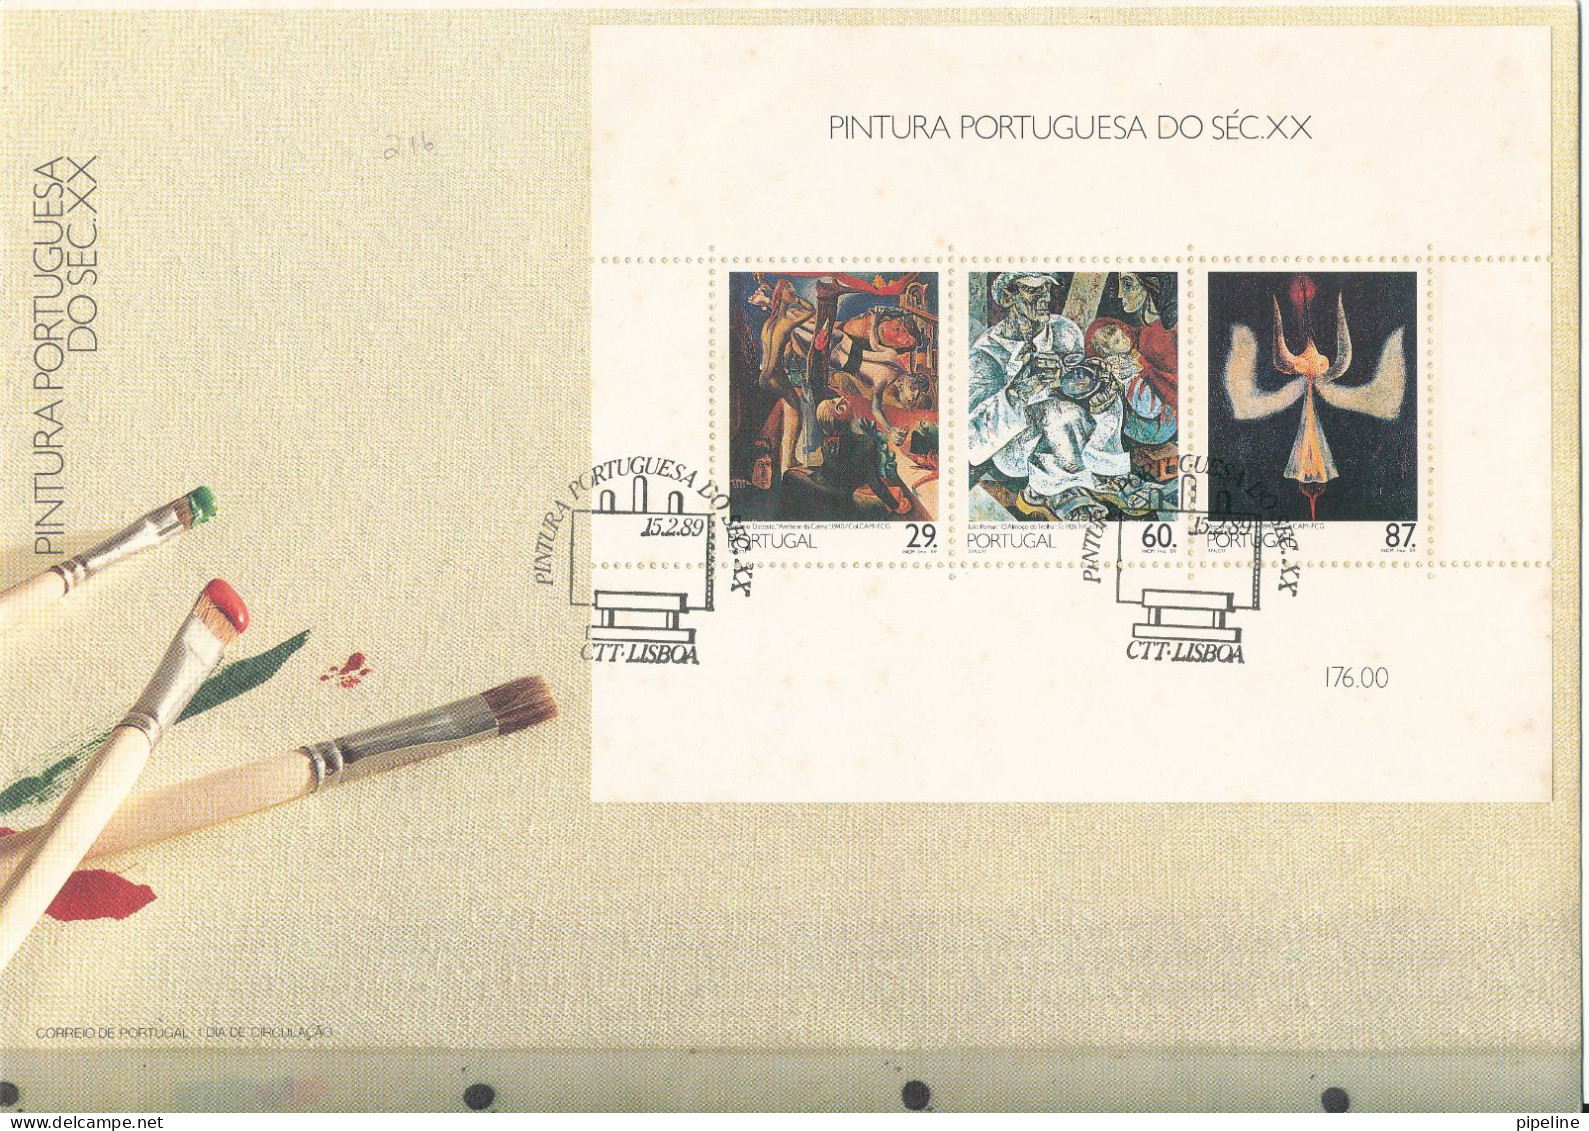 Portugal FDC 15-2-1989 Paintings Souvenir Sheet With Cachet - FDC